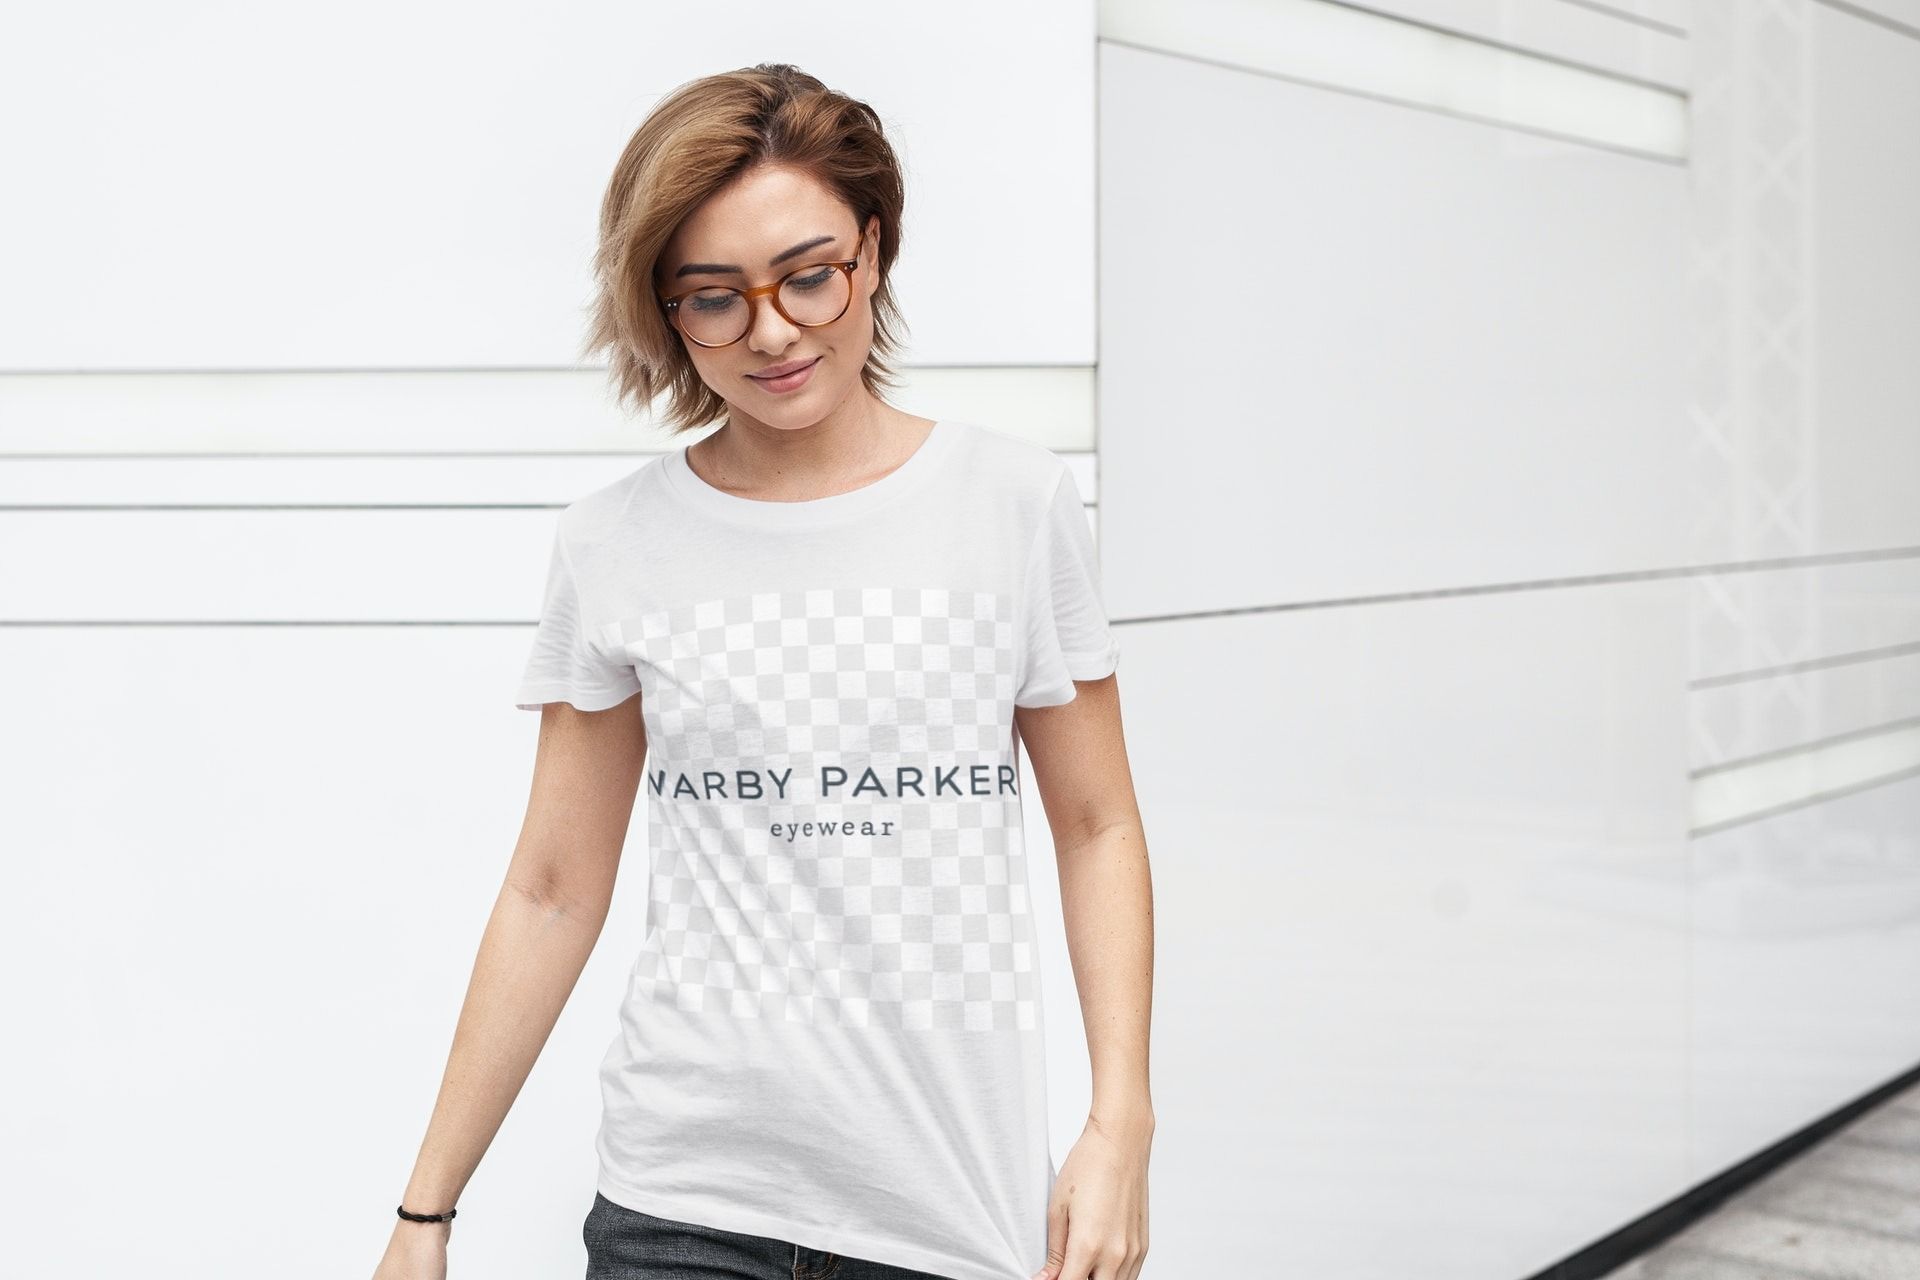 Warby Parker Initial Public Offering